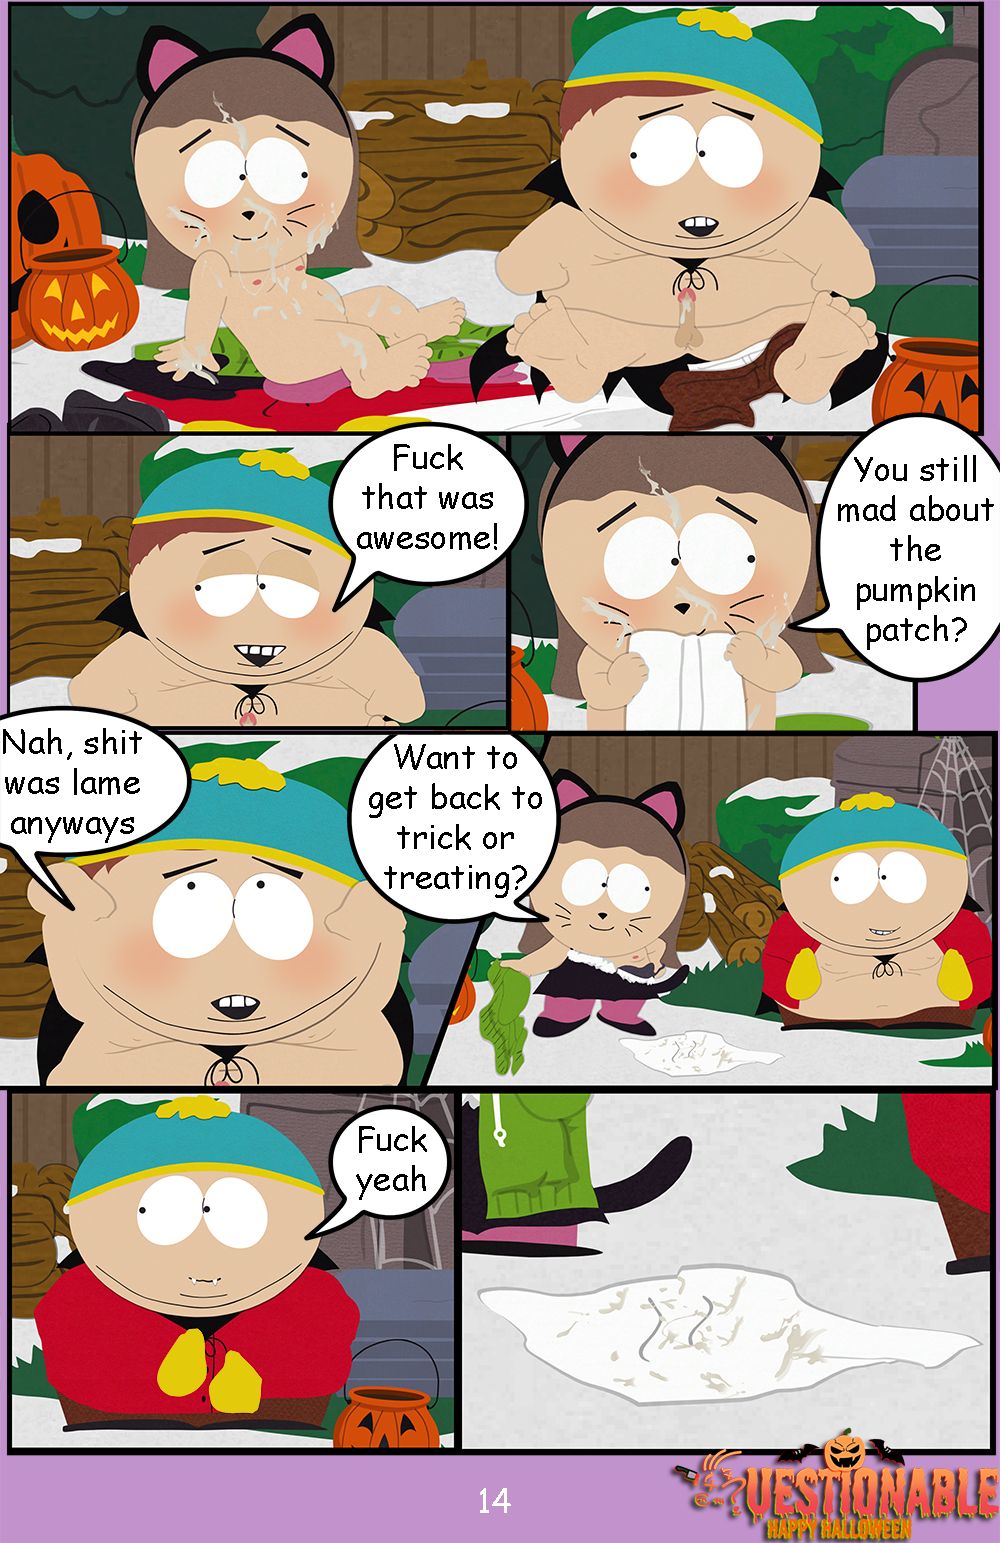 Porn South Park Style - Questionable - South Park Happy Halloween [English] - FreeAdultComix